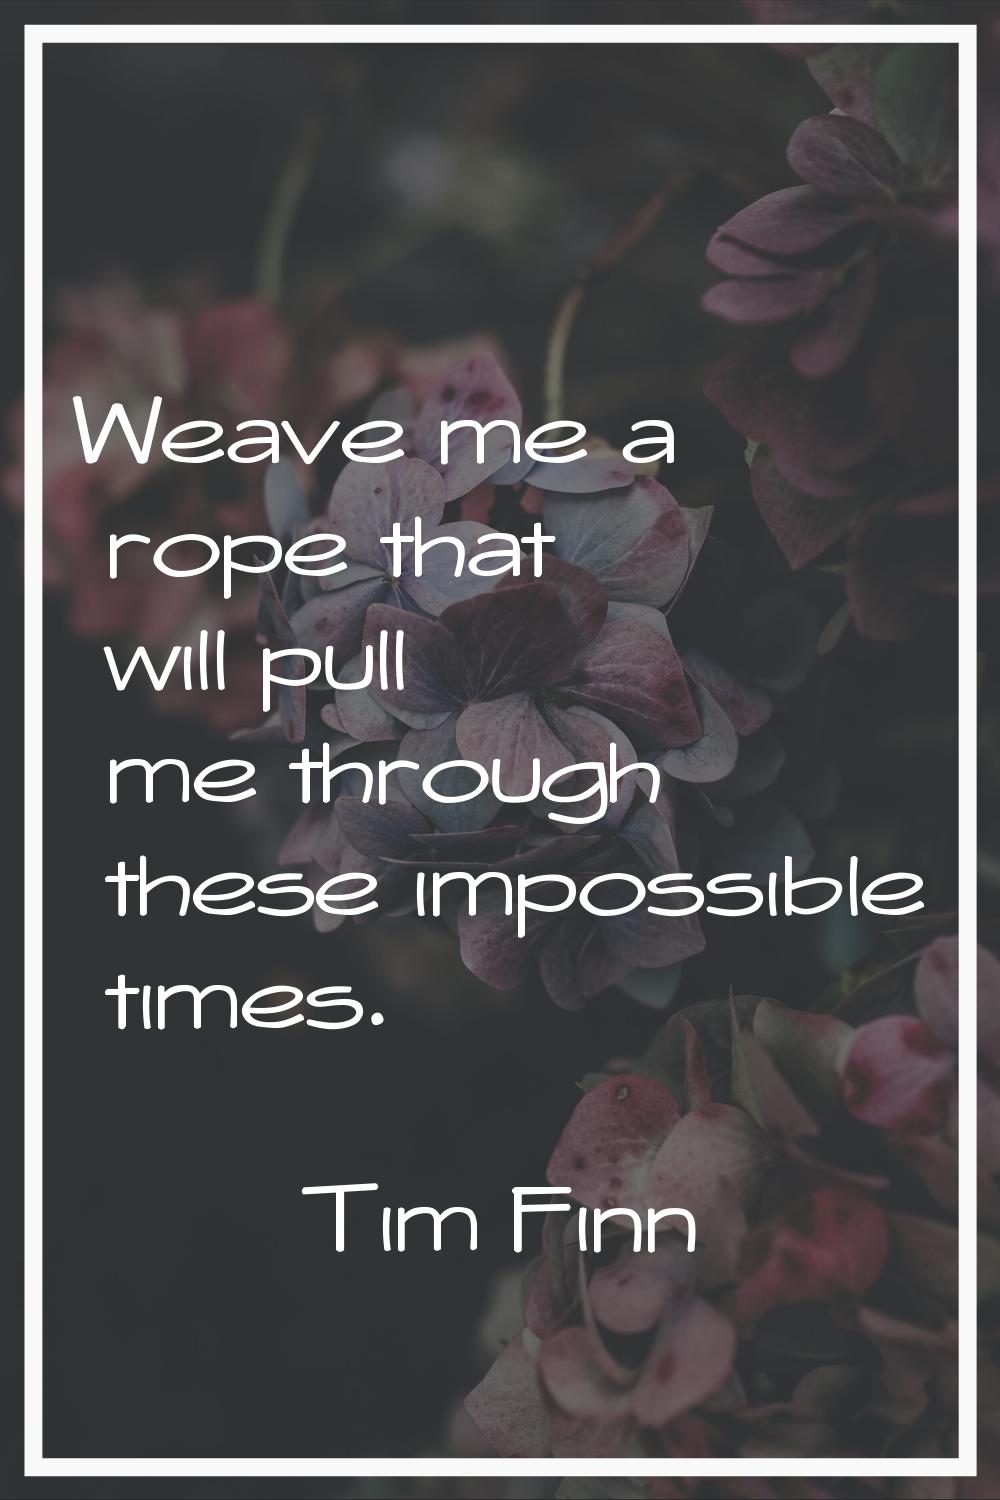 Weave me a rope that will pull me through these impossible times.